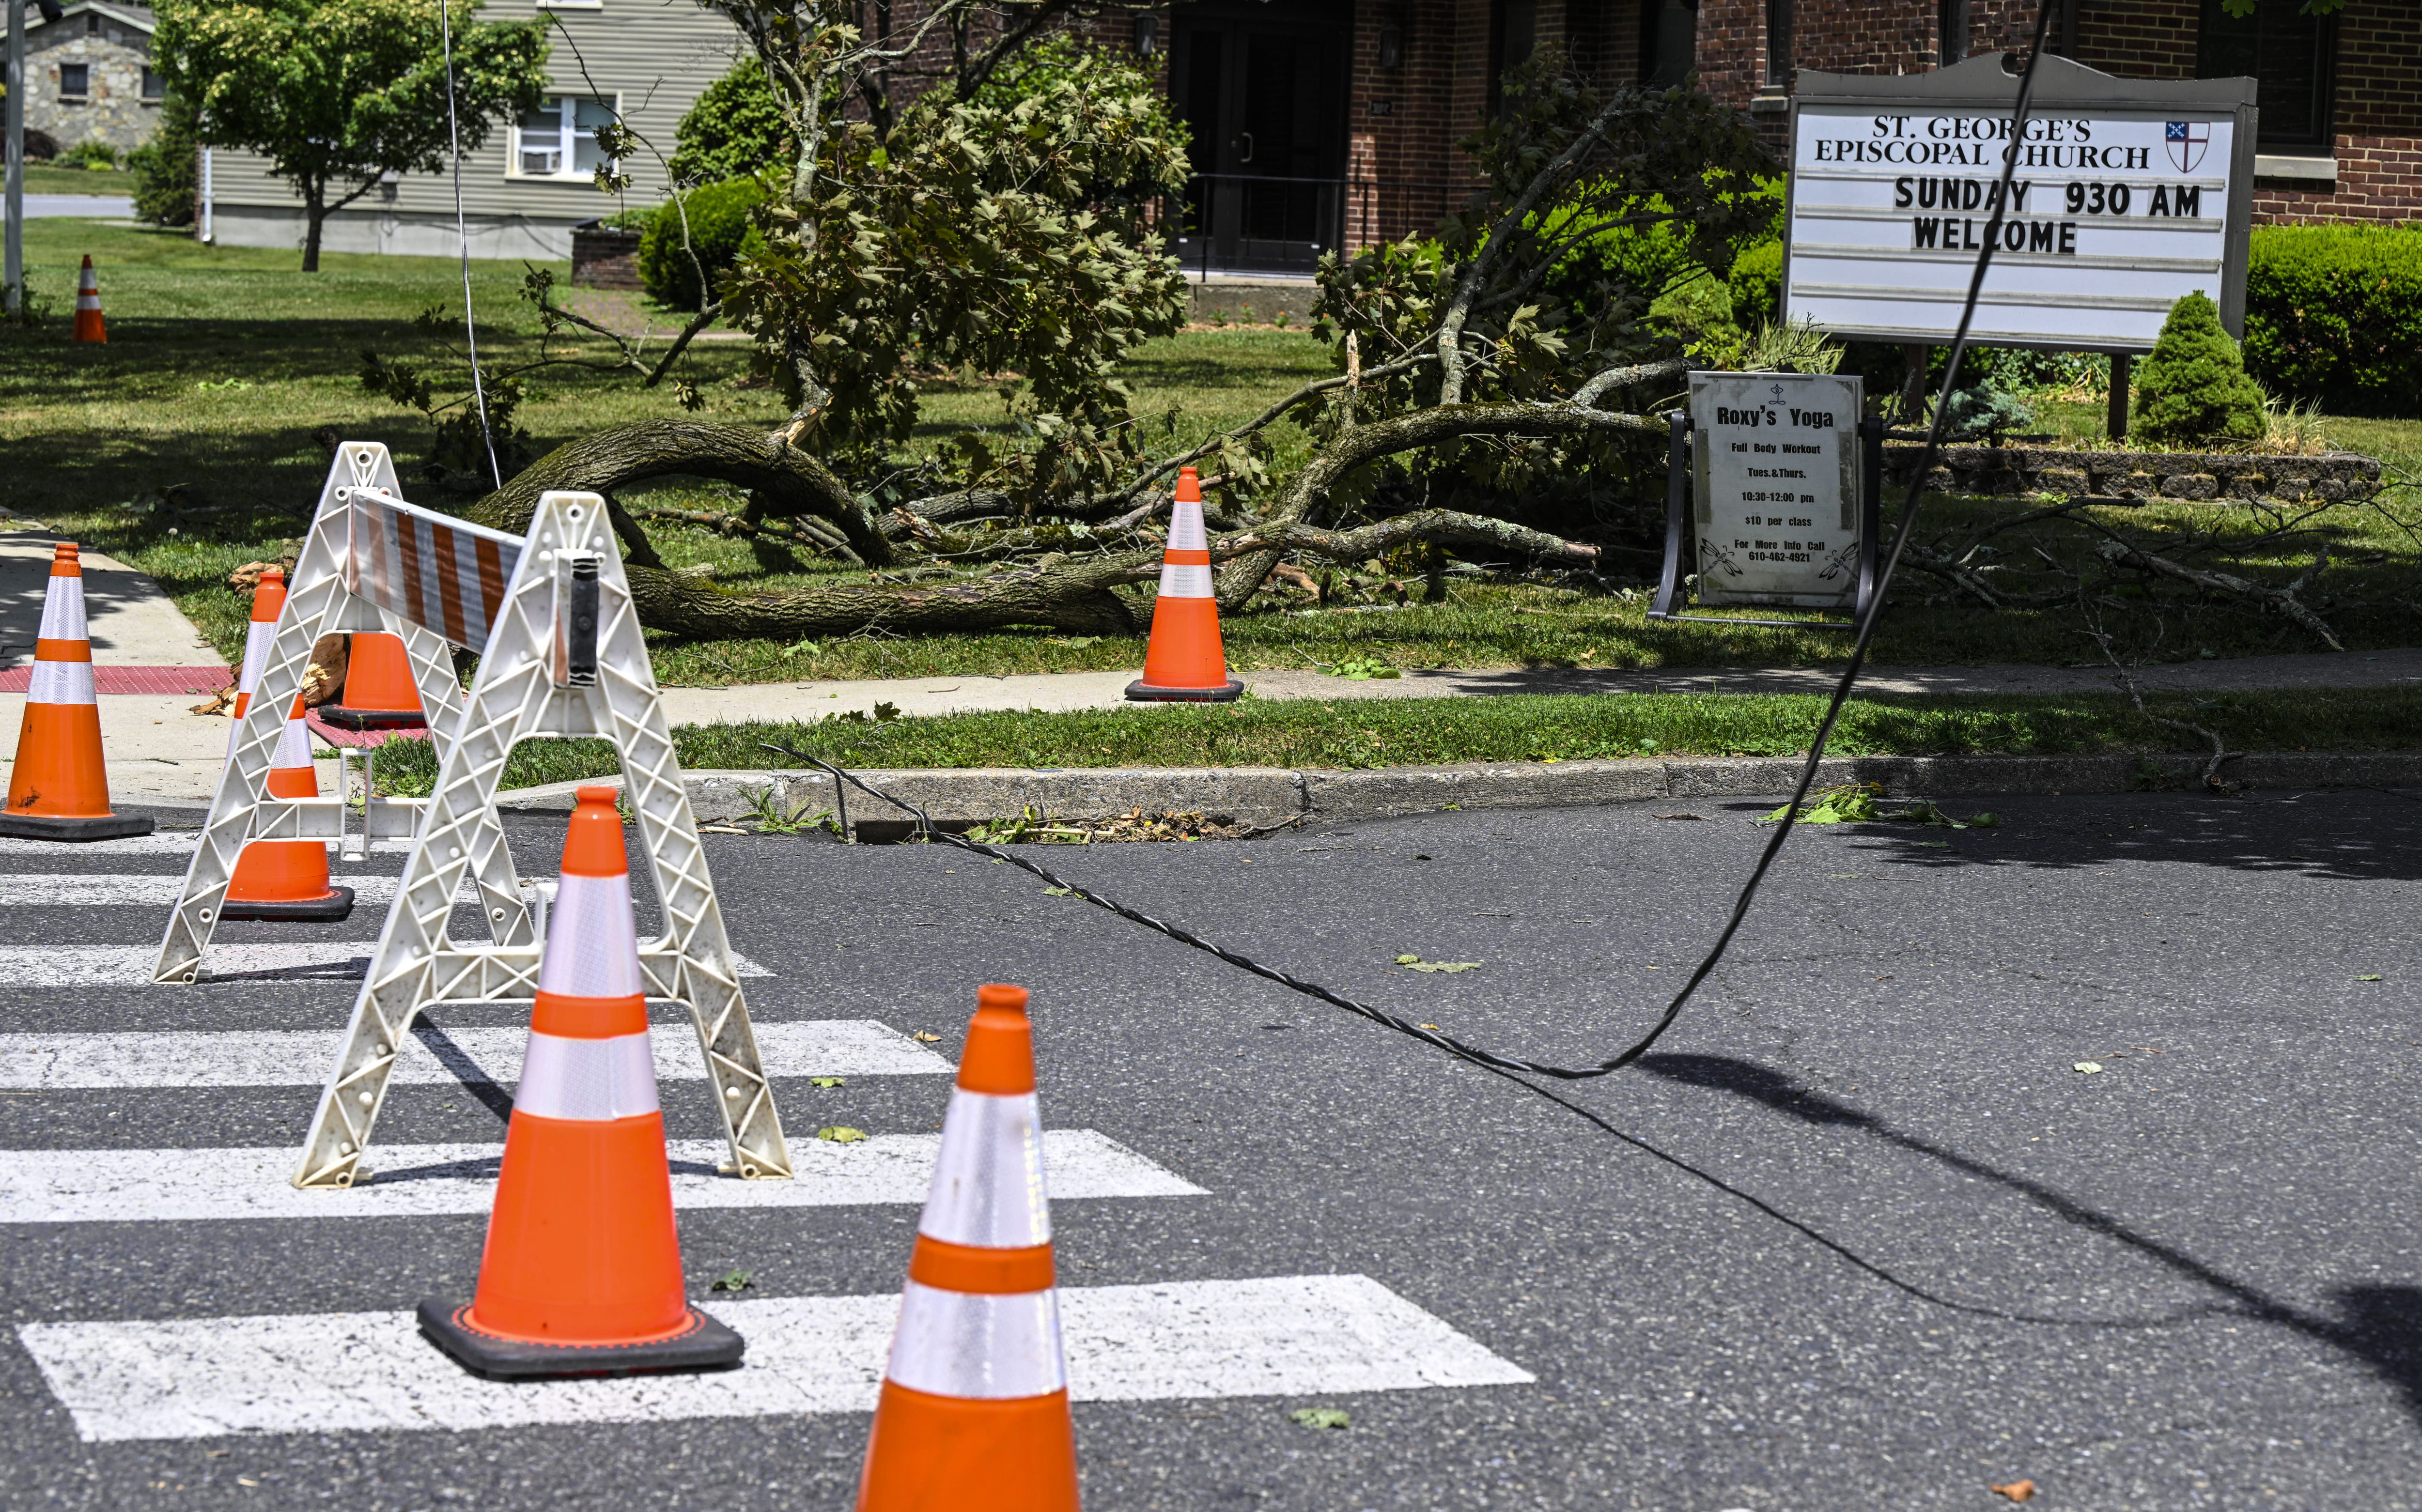 A power line is still down and Delaware Avenue is closed near St. George's Episcopal Church Thursday, June 27, 2024, in Hellertown after a severe thunderstorm with nearly 60 mph wind gusts ripped through the Lehigh Valley the night before. (Monica Cabrera/Special to The Morning Call)